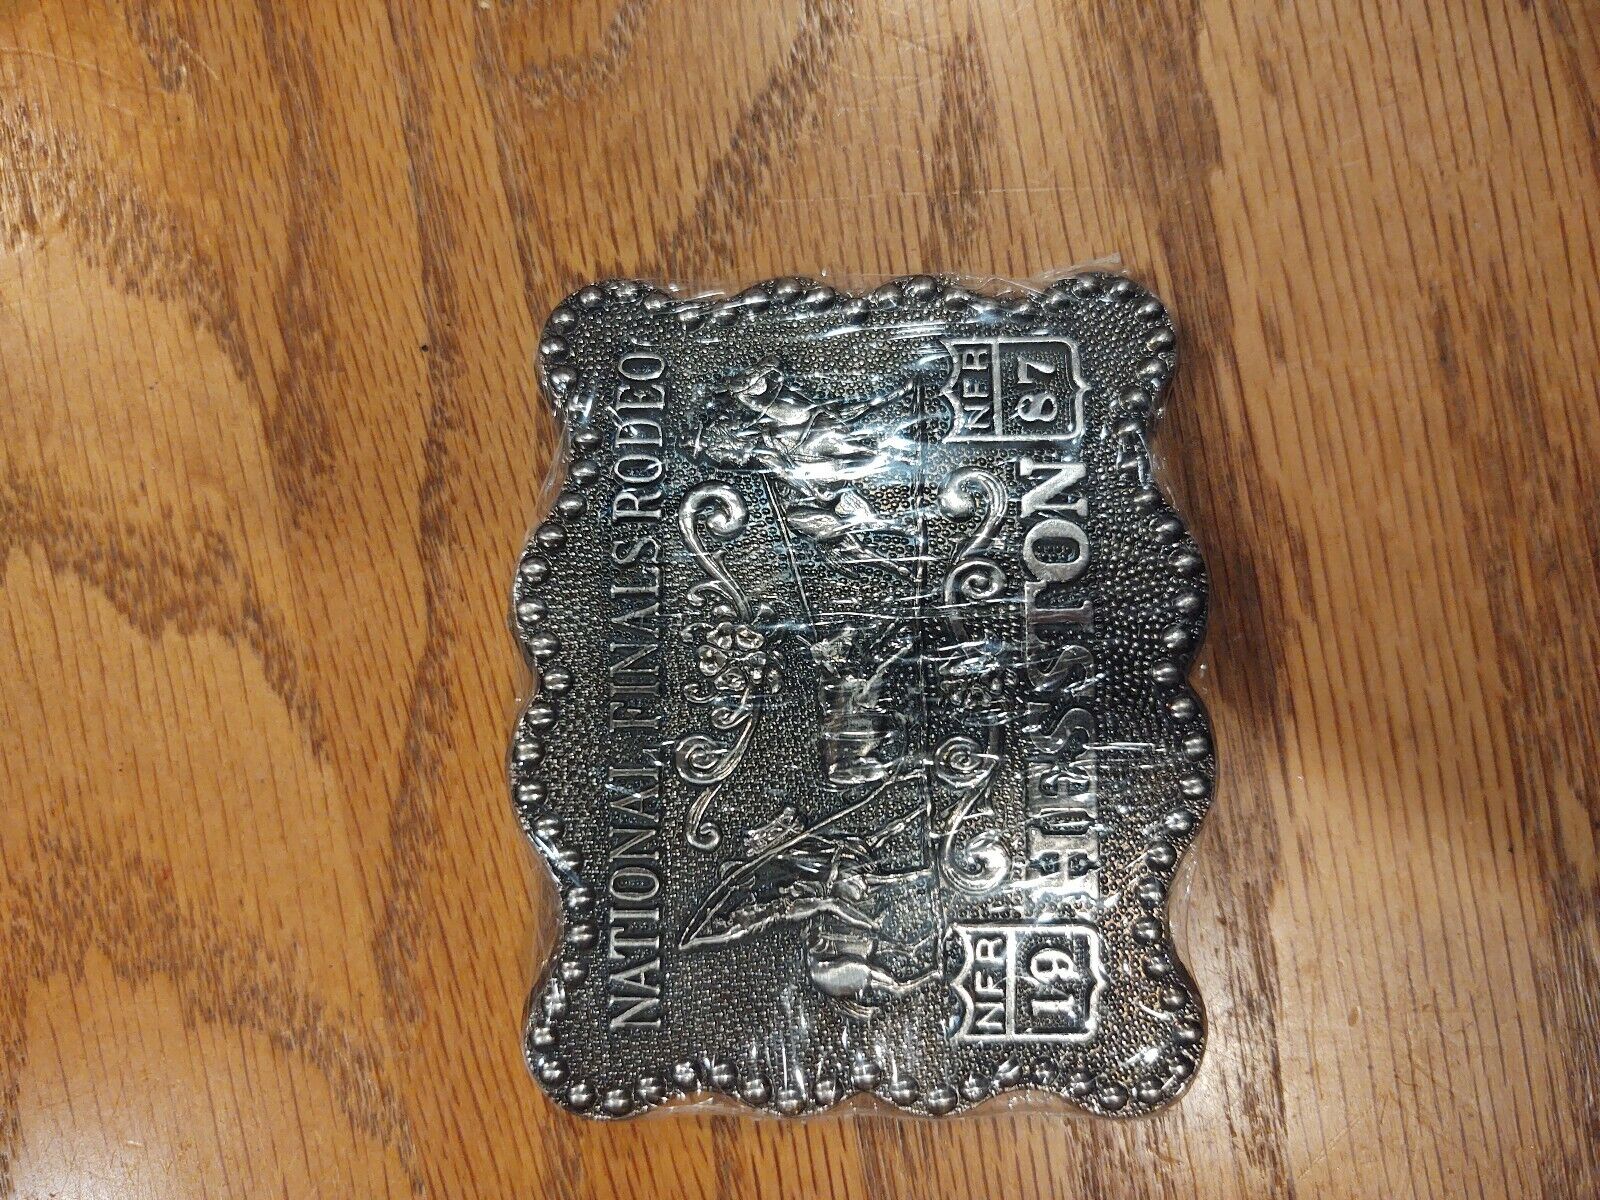 large 1987 Hesston Rodeo Belt Buckle National Finals Rodeo Showing Fred Fellows 